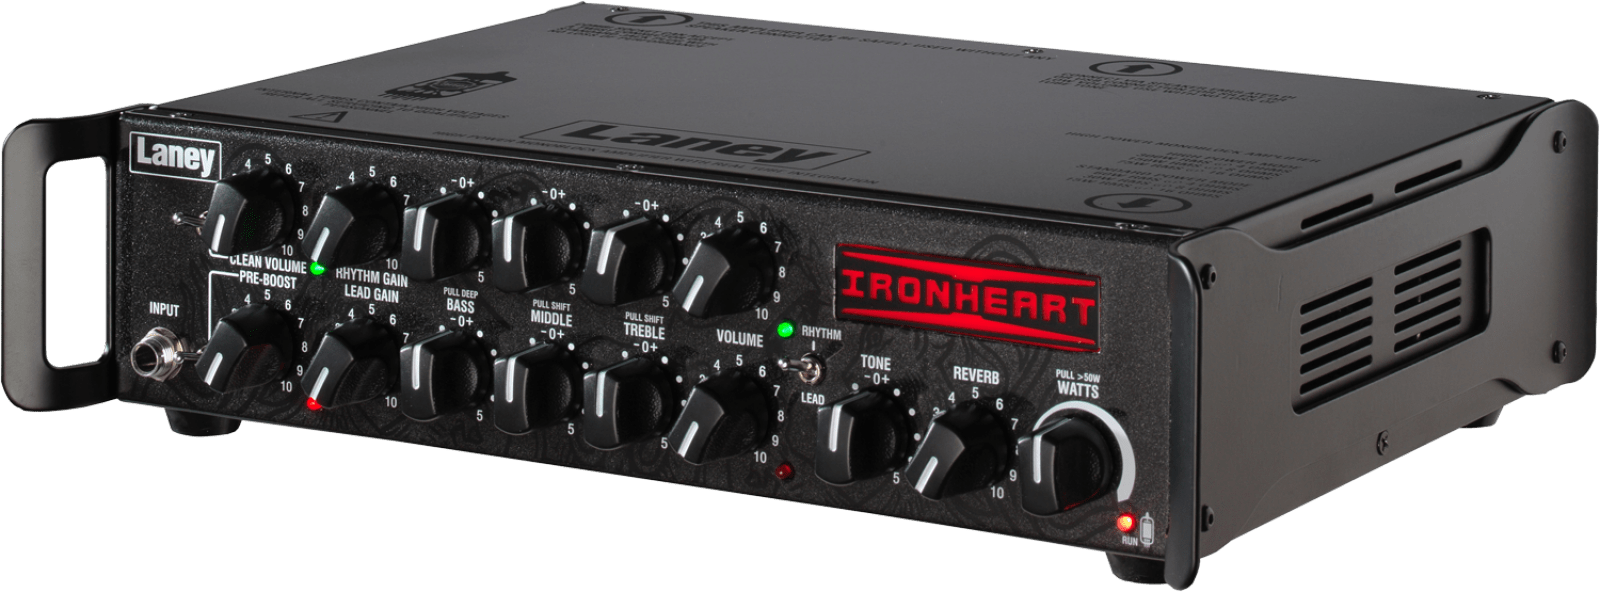 Laney UK IRTSLS IronHeart a 300W Tube Hybrid Guitar Amp, with 3 Channels and Portable.